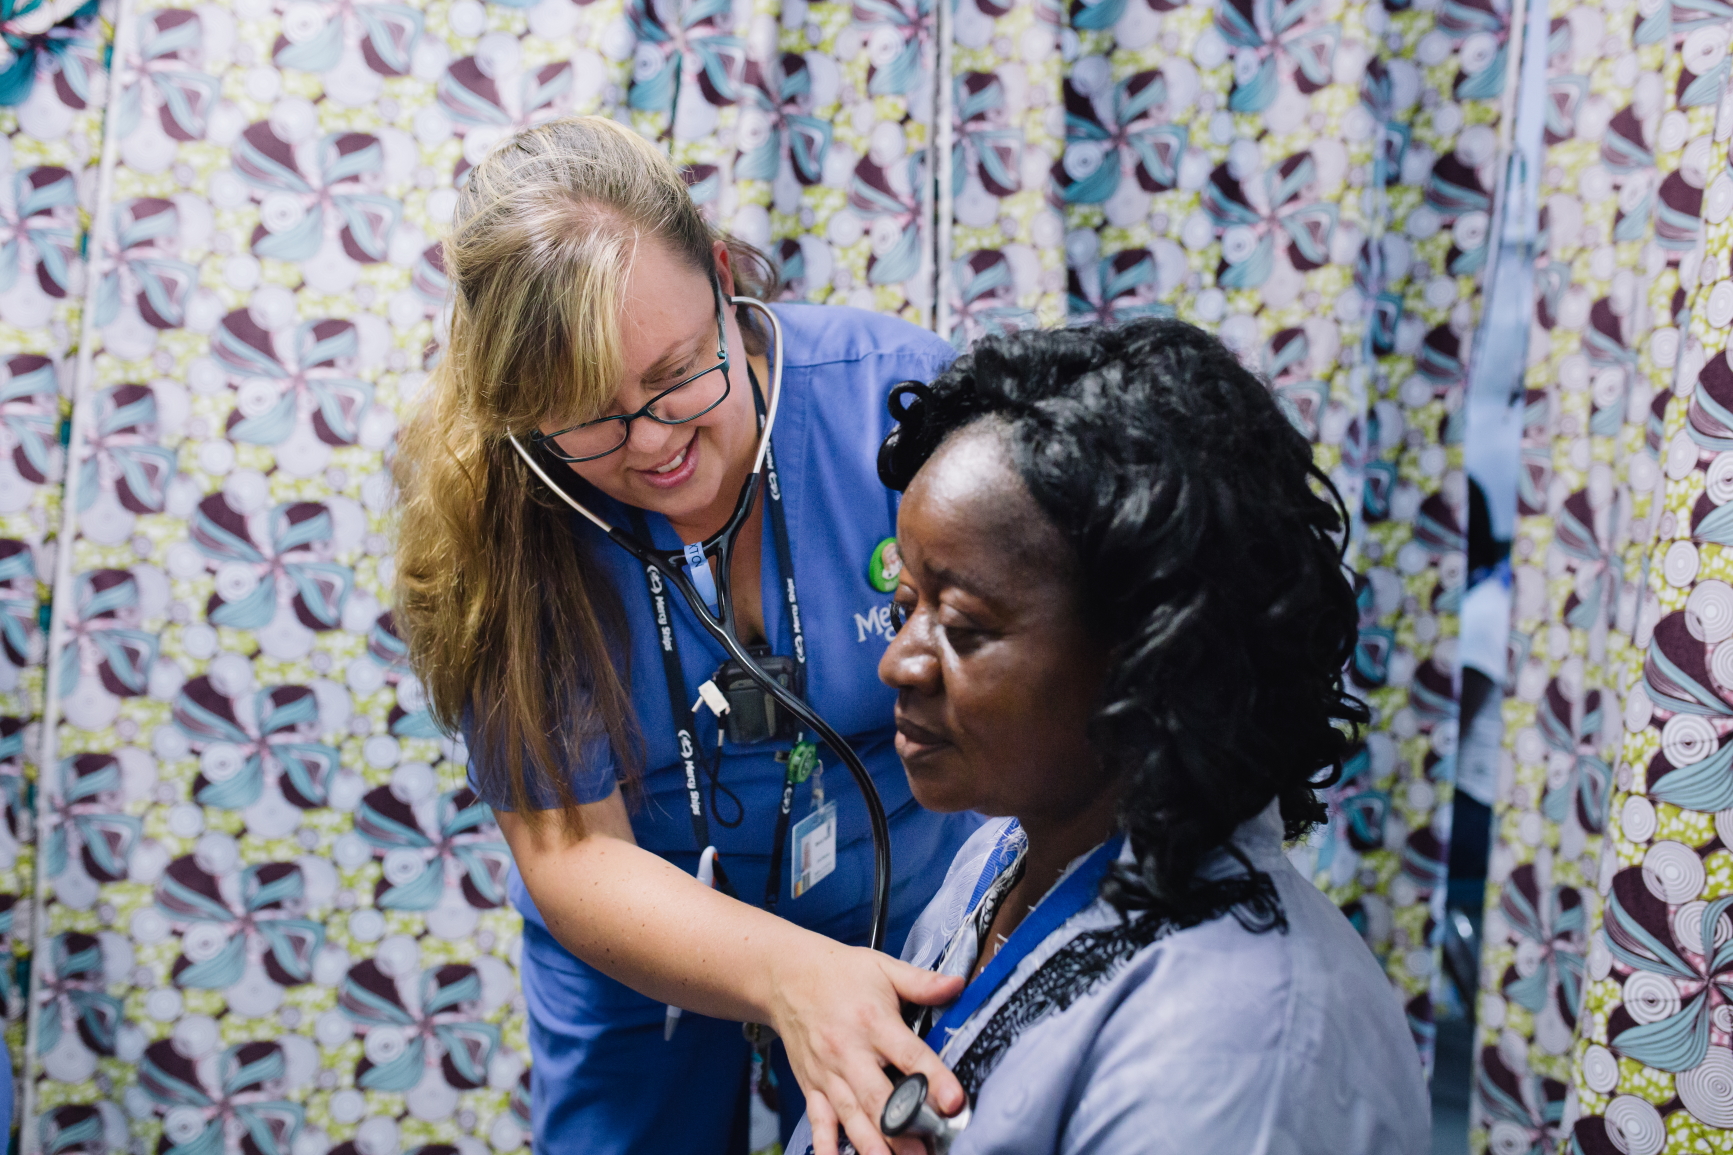 Wendy Sexton, Crew Physician, examining a patient in Admissions.